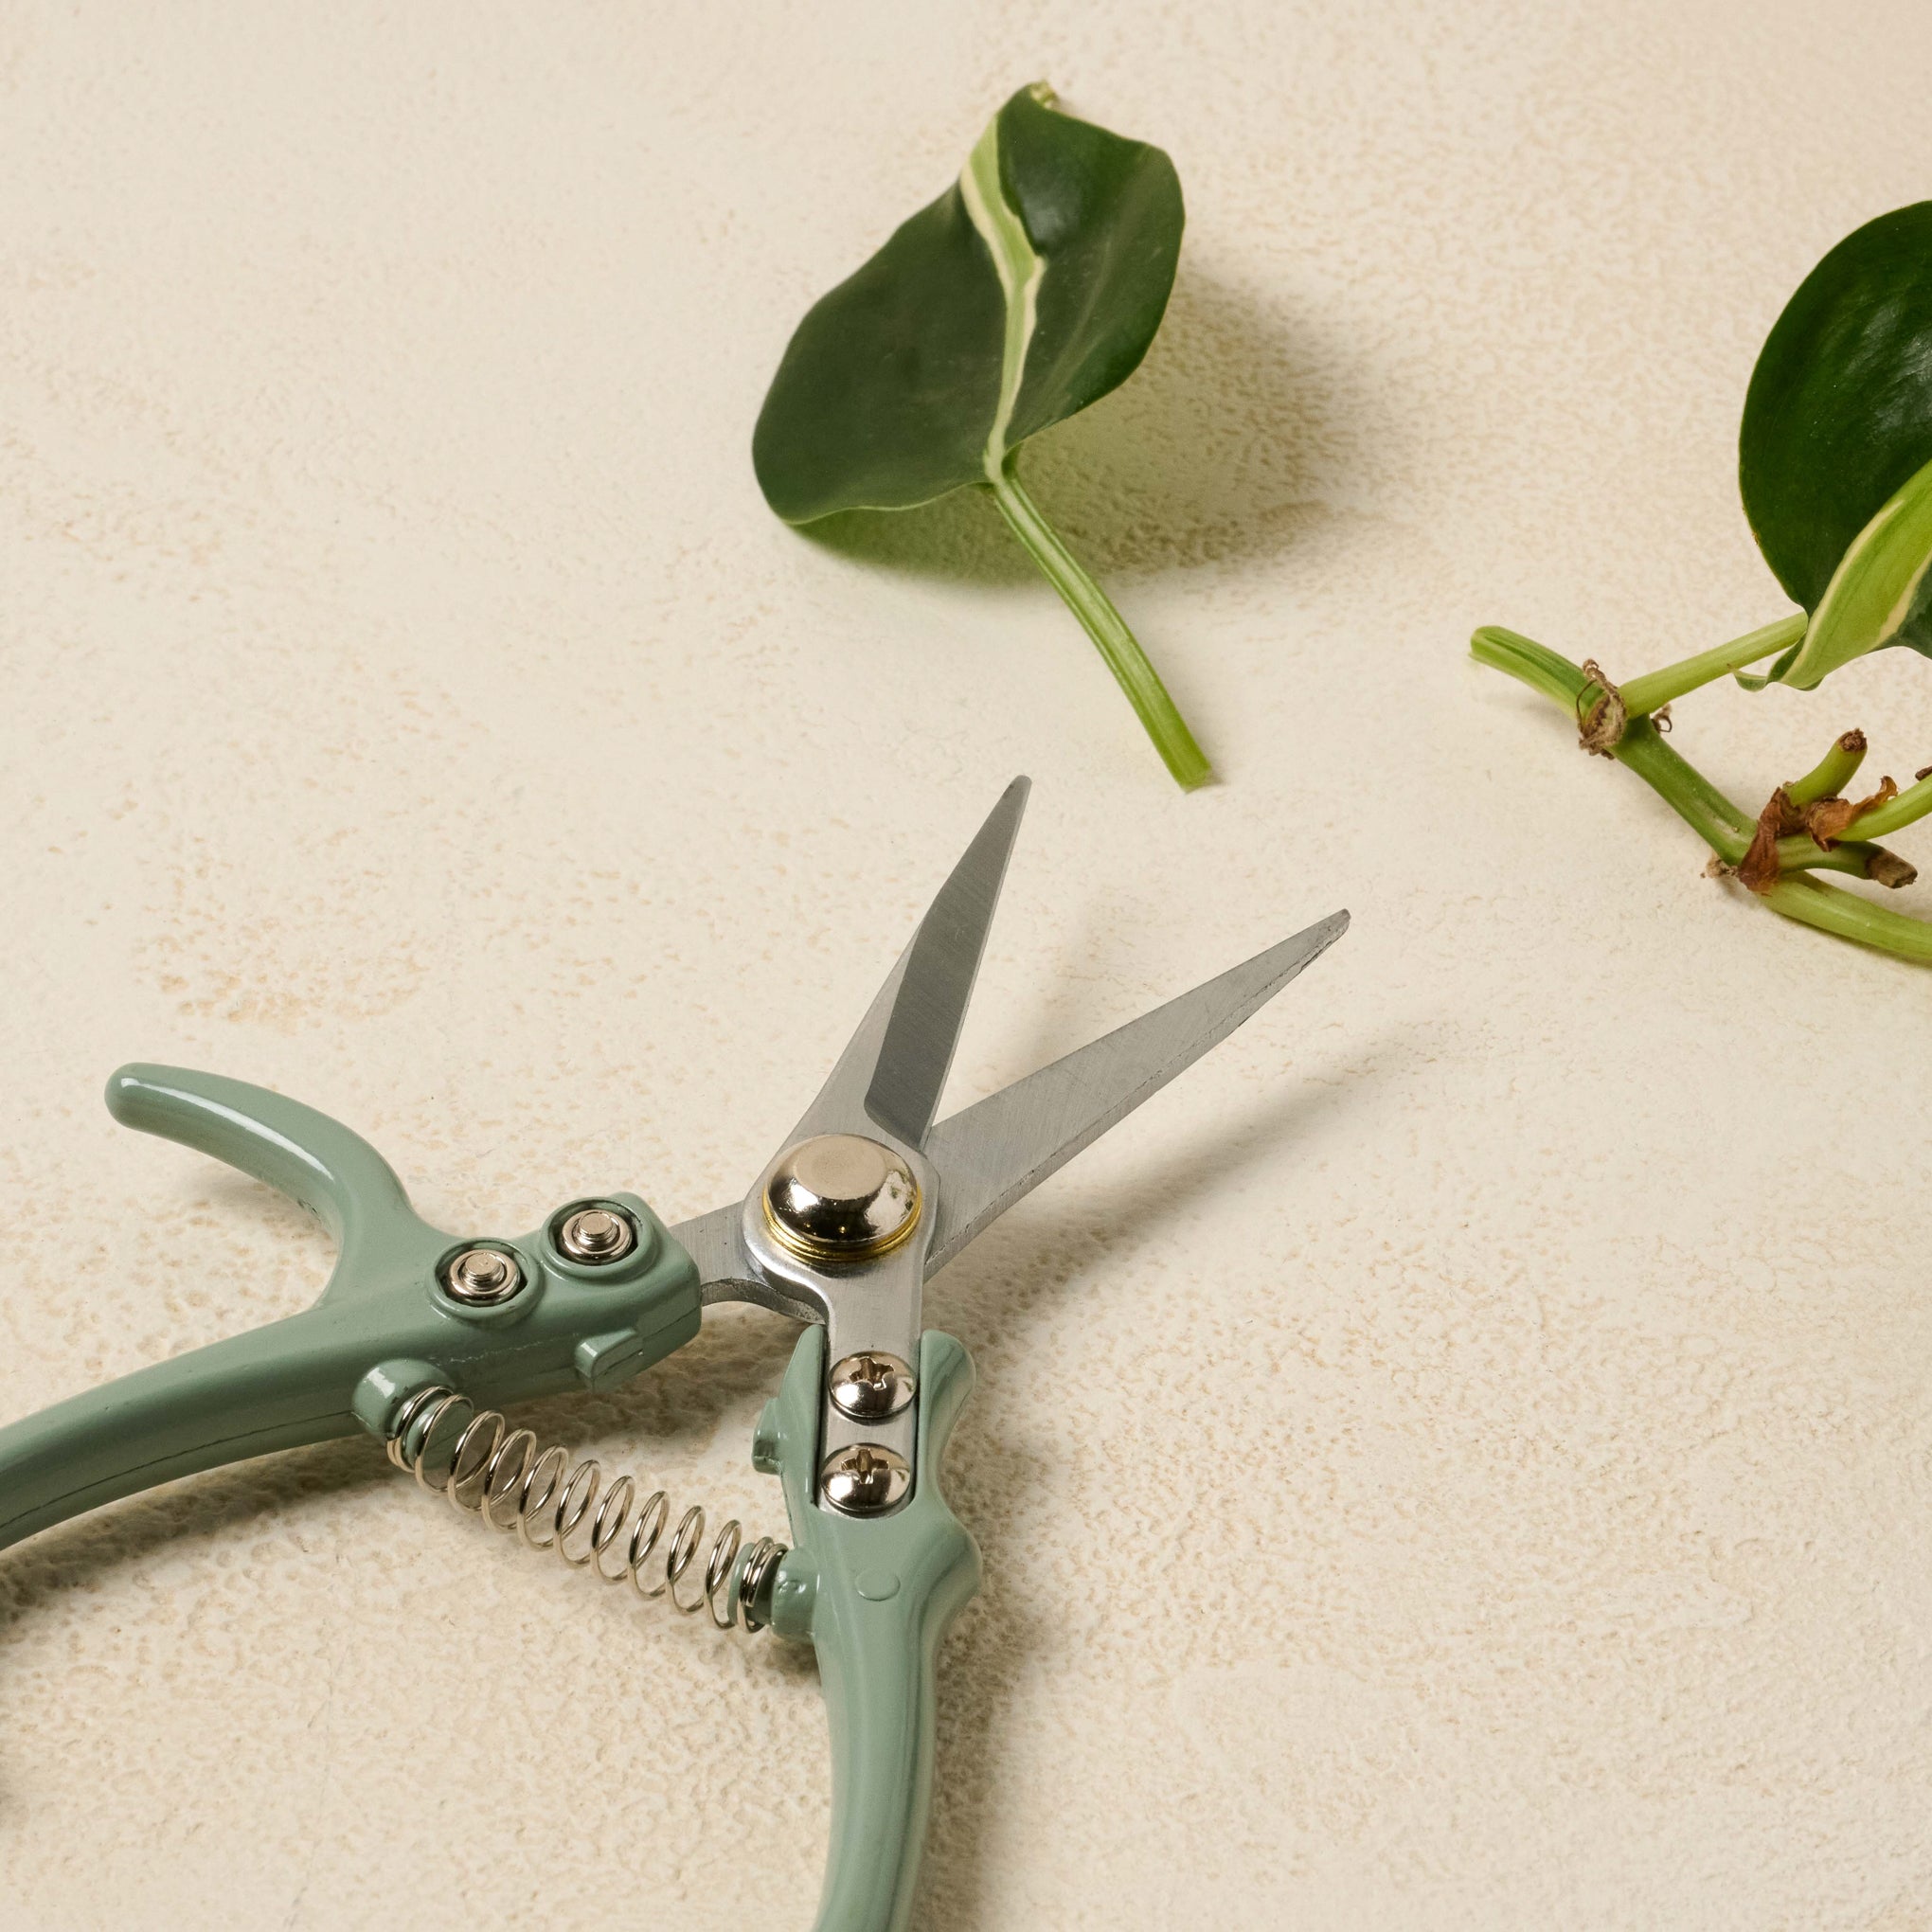 Pale Mint Pruning Shears next to cut leaves On sale for $14.40, discounted from $18.00